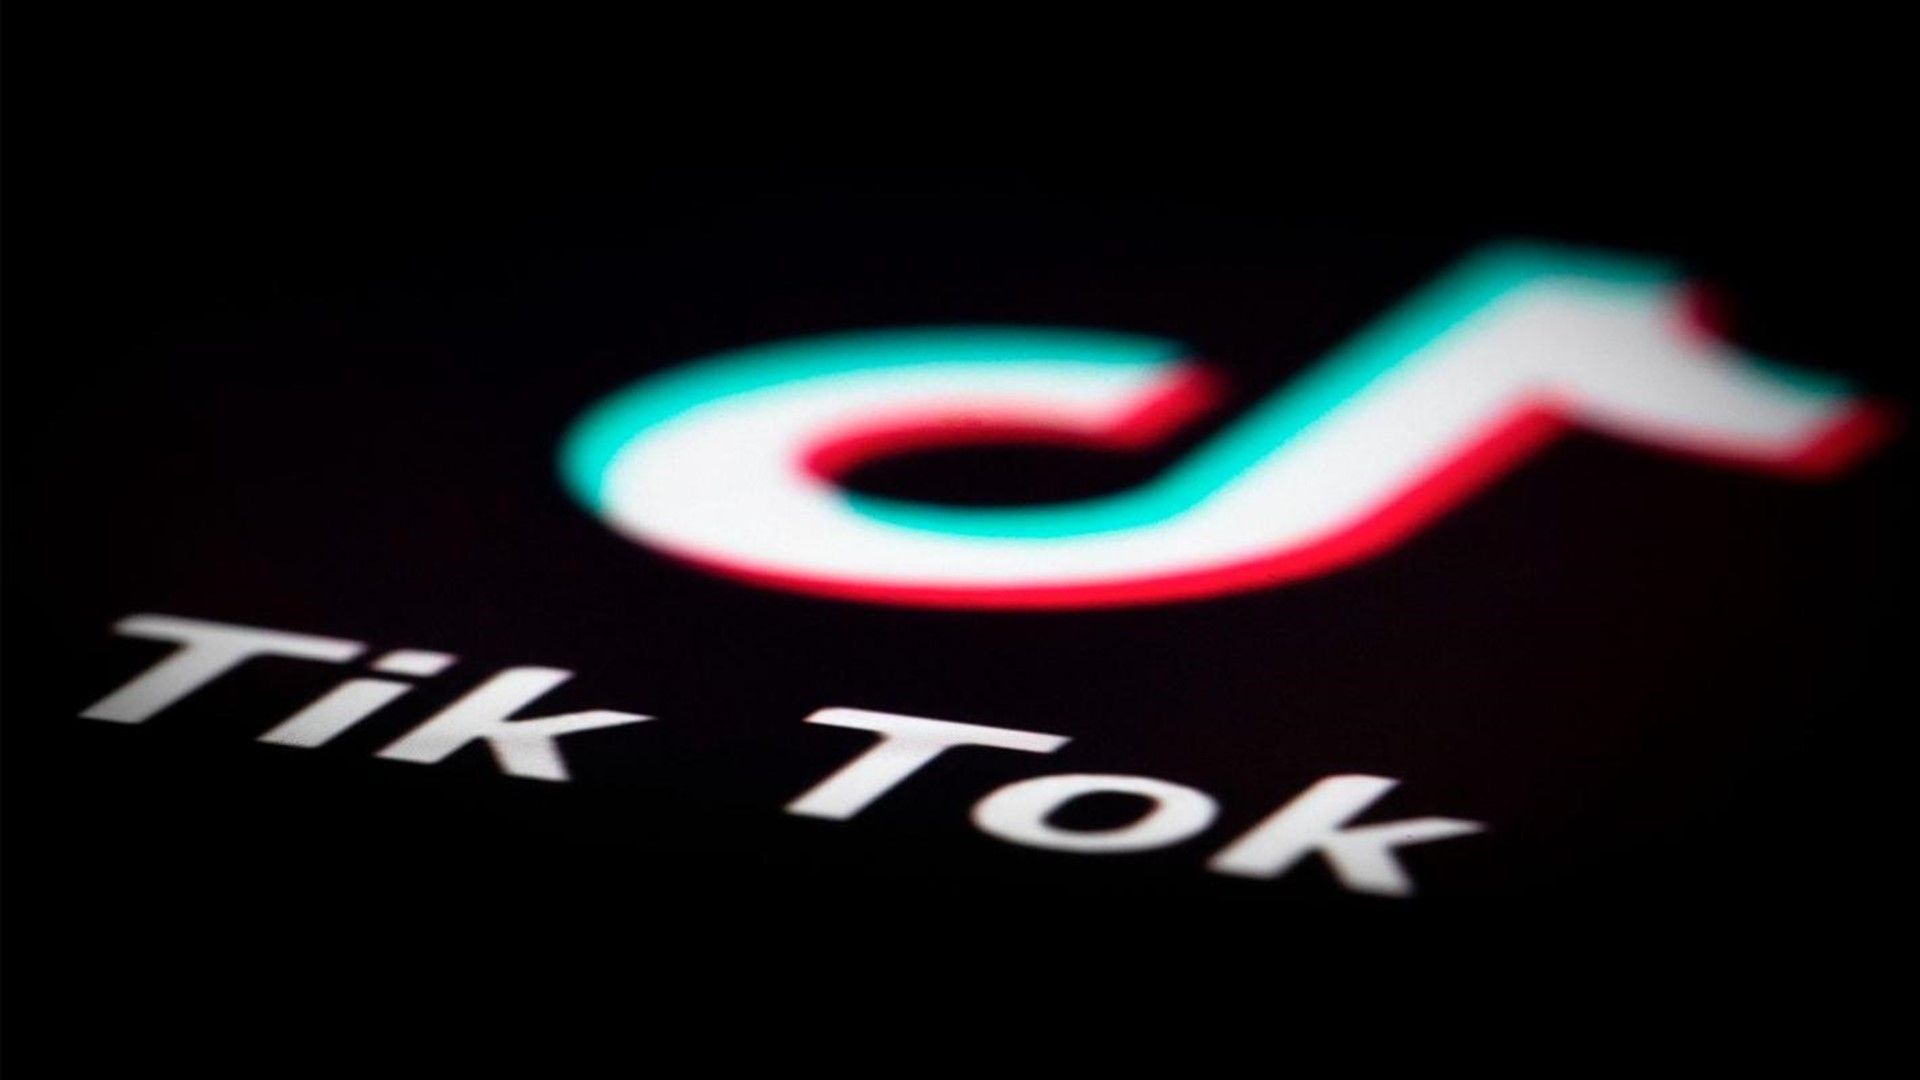 TikTok makers may be working on a smartphone with the app pre